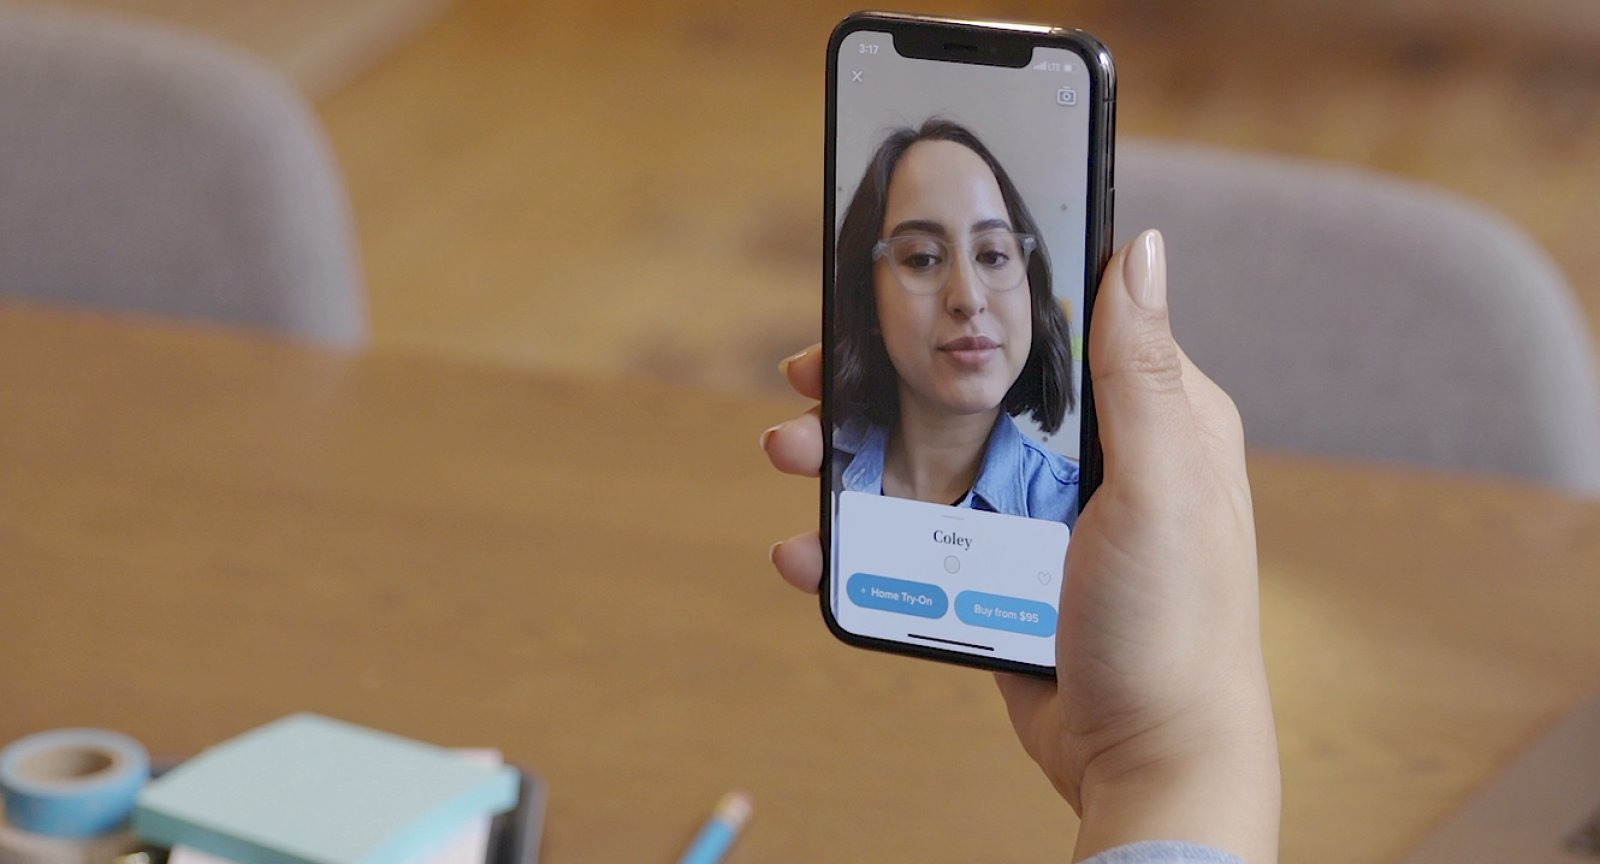 Warby Parker's iPhone app lets you try on glasses in AR | DeviceDaily.com